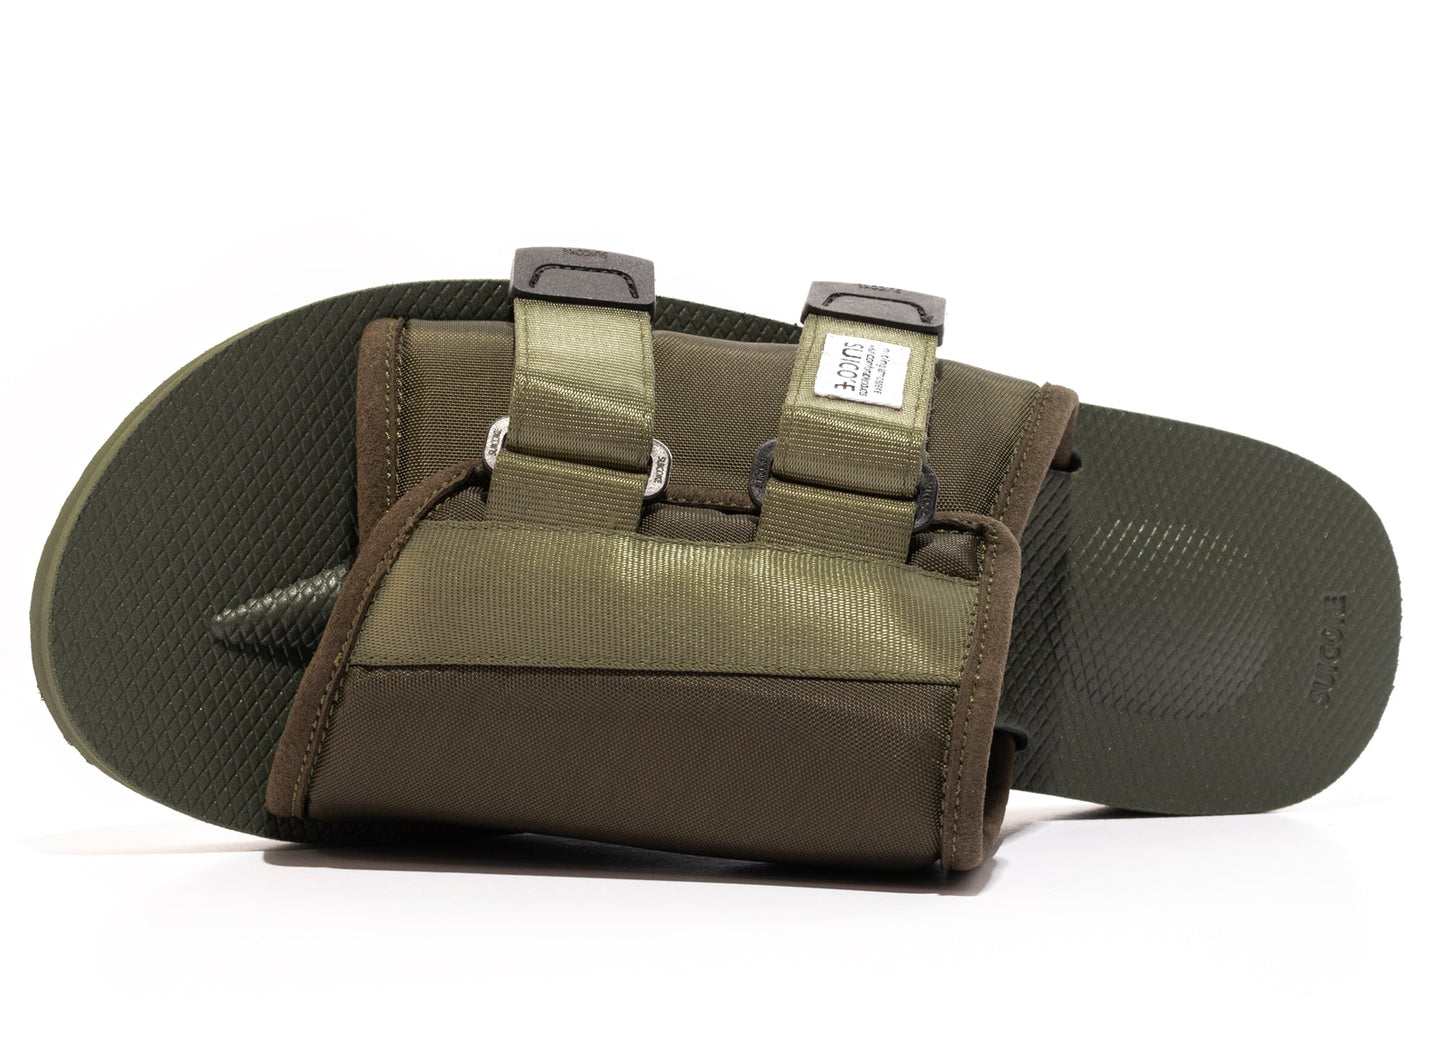 Suicoke KAW-Cab Sandals in Olive